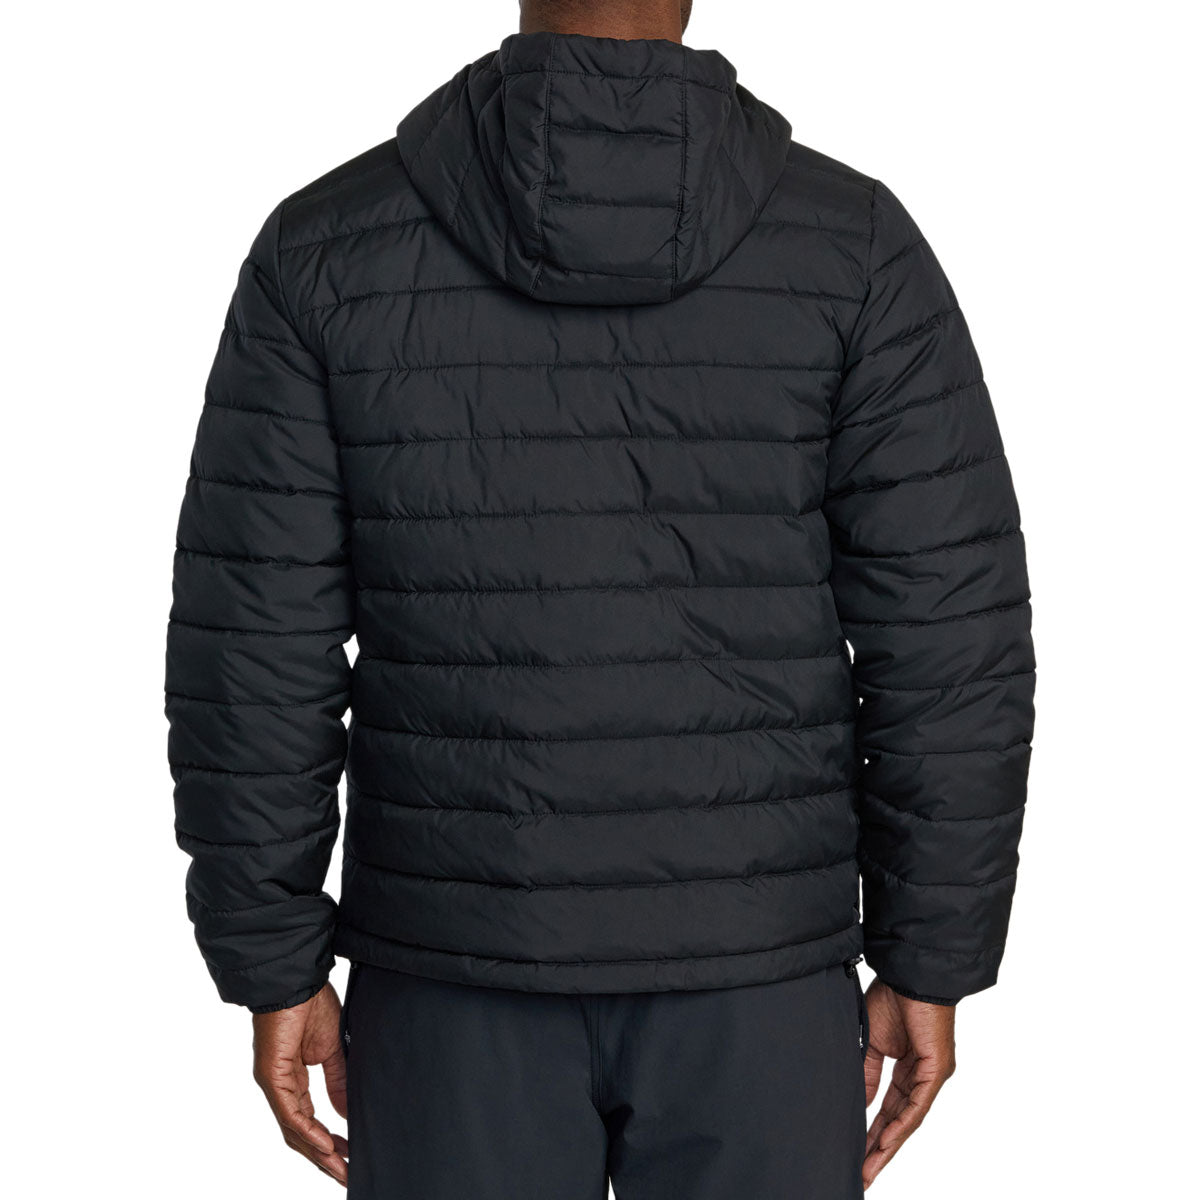 RVCA Packable Puffa Hooded Jacket - Black image 2